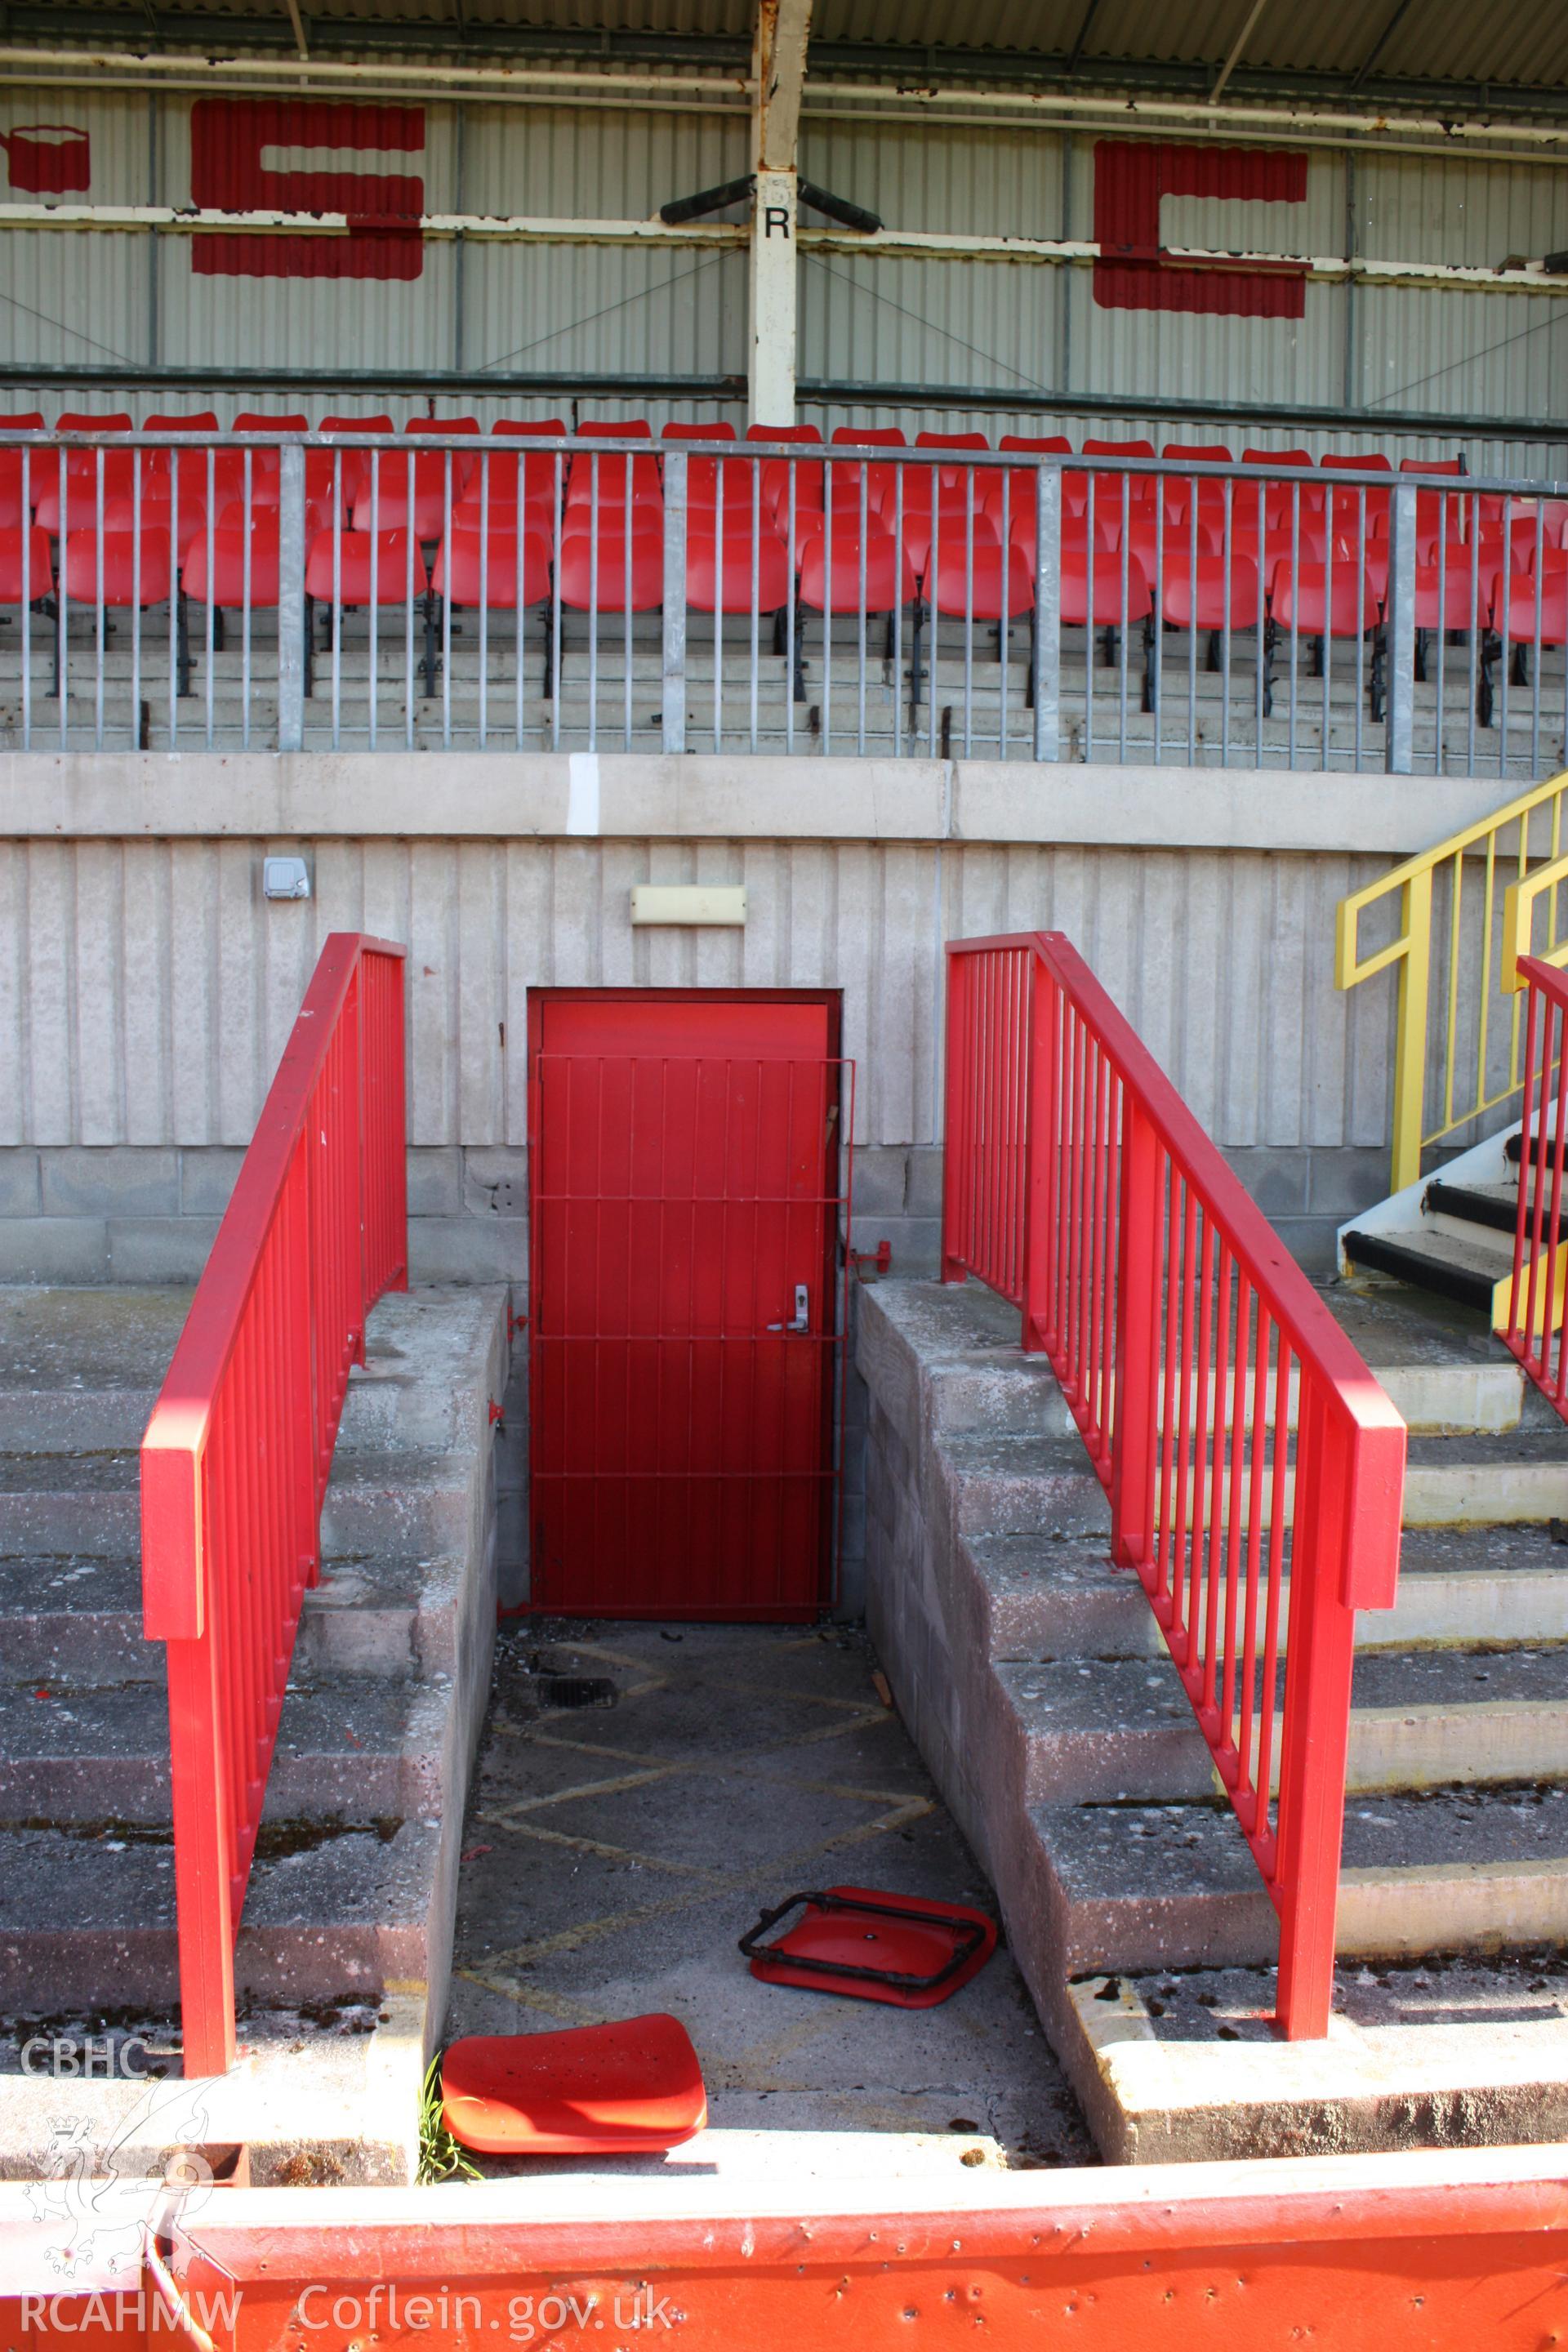 North Stand, central entrance